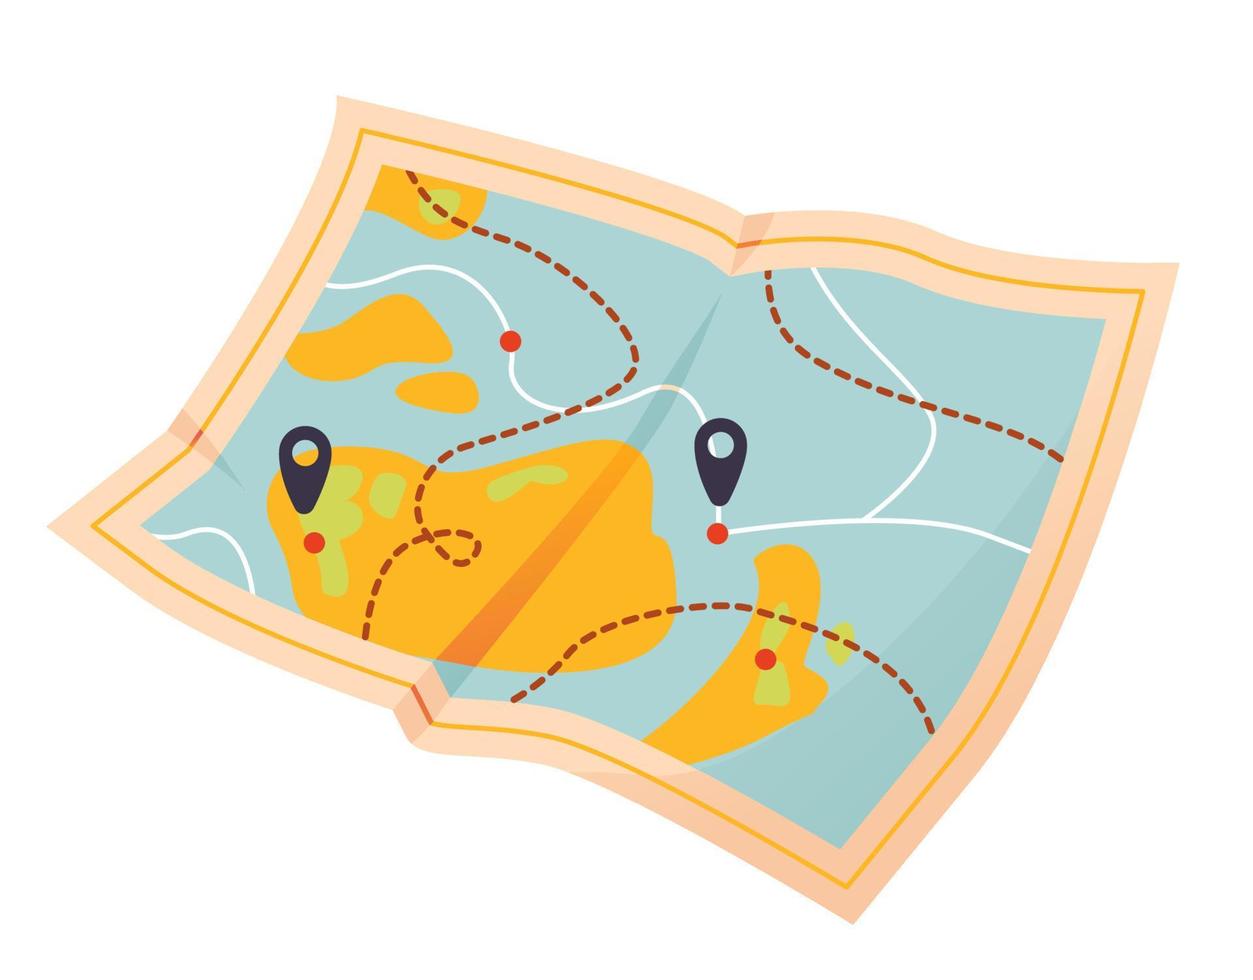 Paper traveler's road map. Vector illustration isolated on a white background.